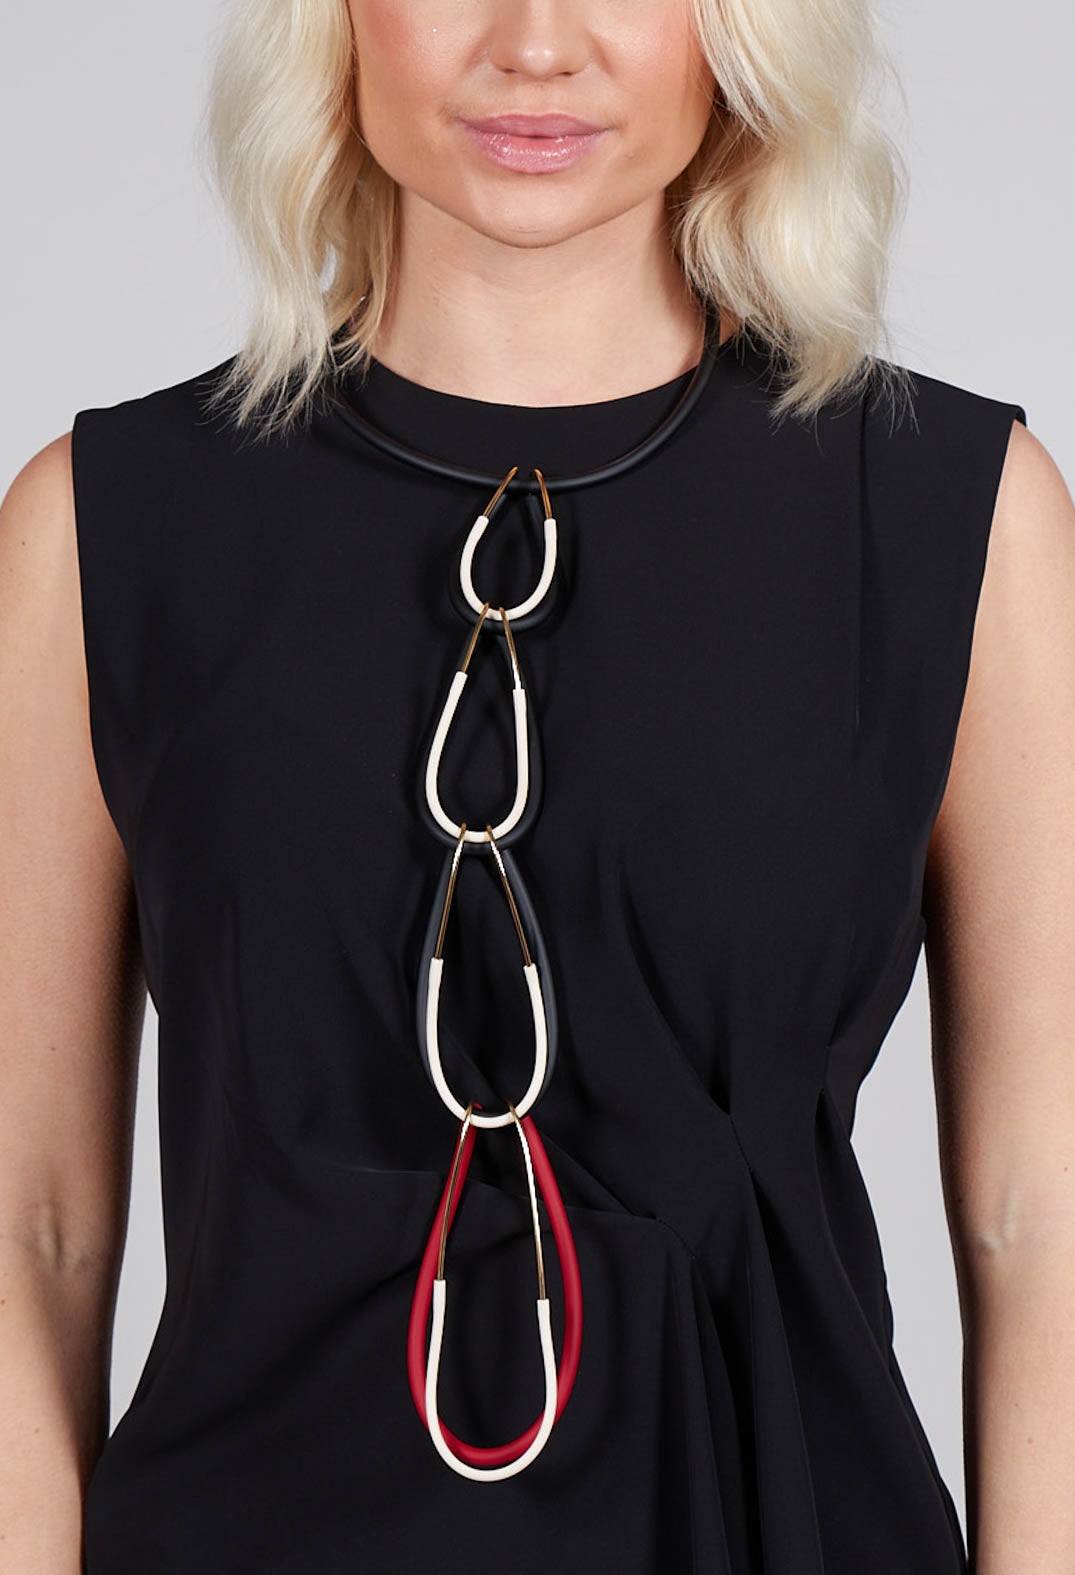 Choker Necklace with Dropped Chain in Red and Black